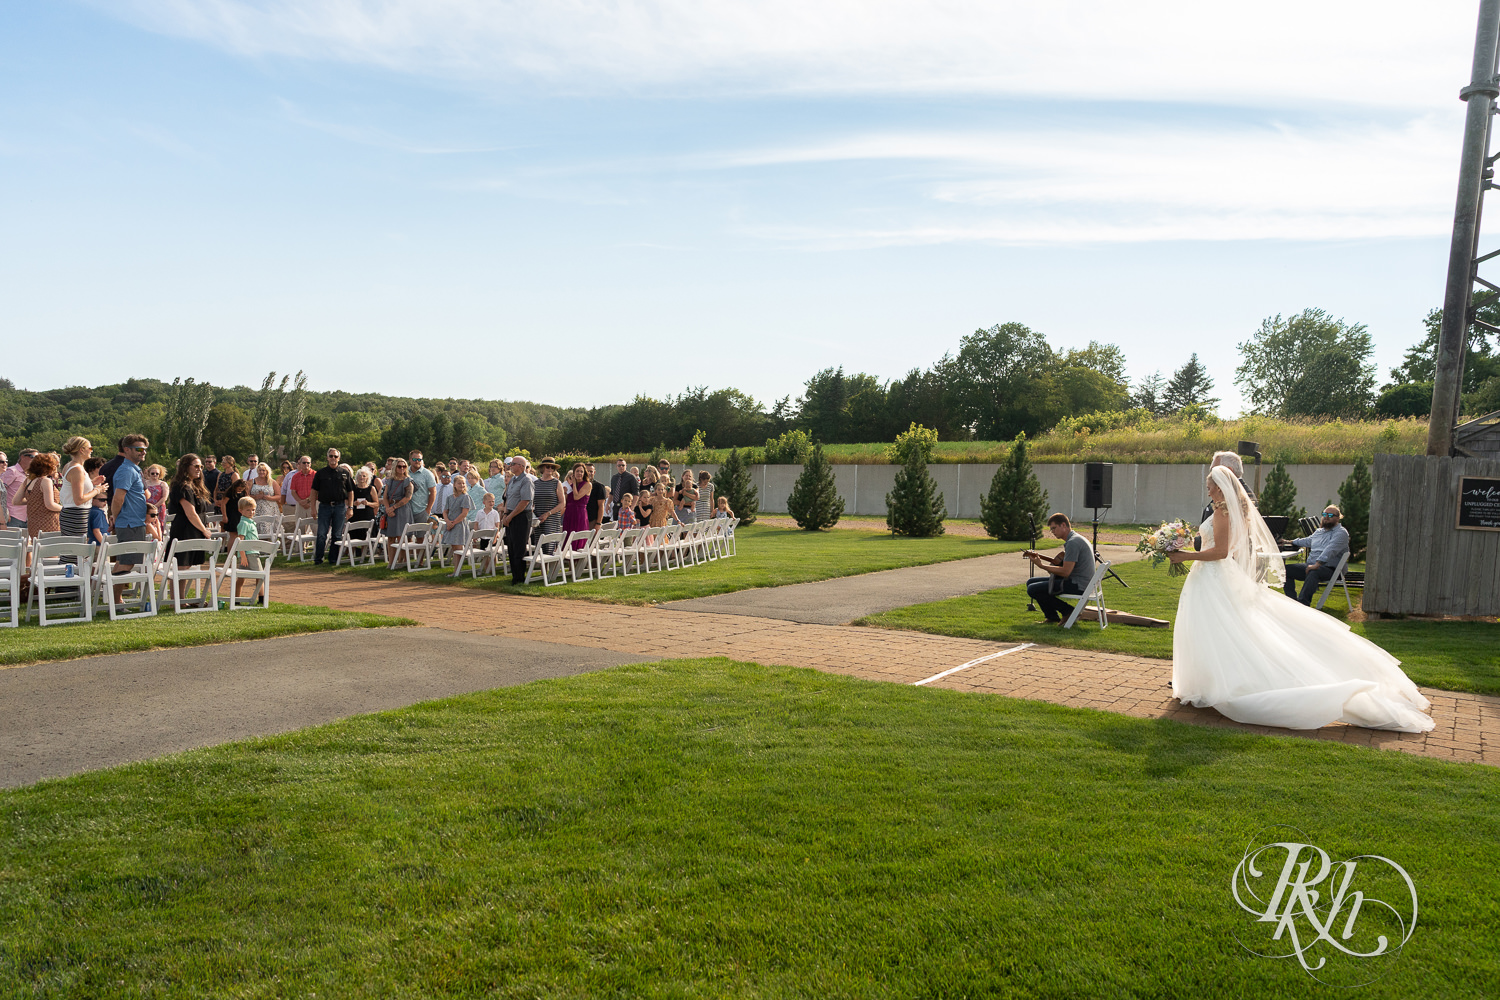 Bride walking down the aisle at The Outpost Center in Chaska, Minnesota.